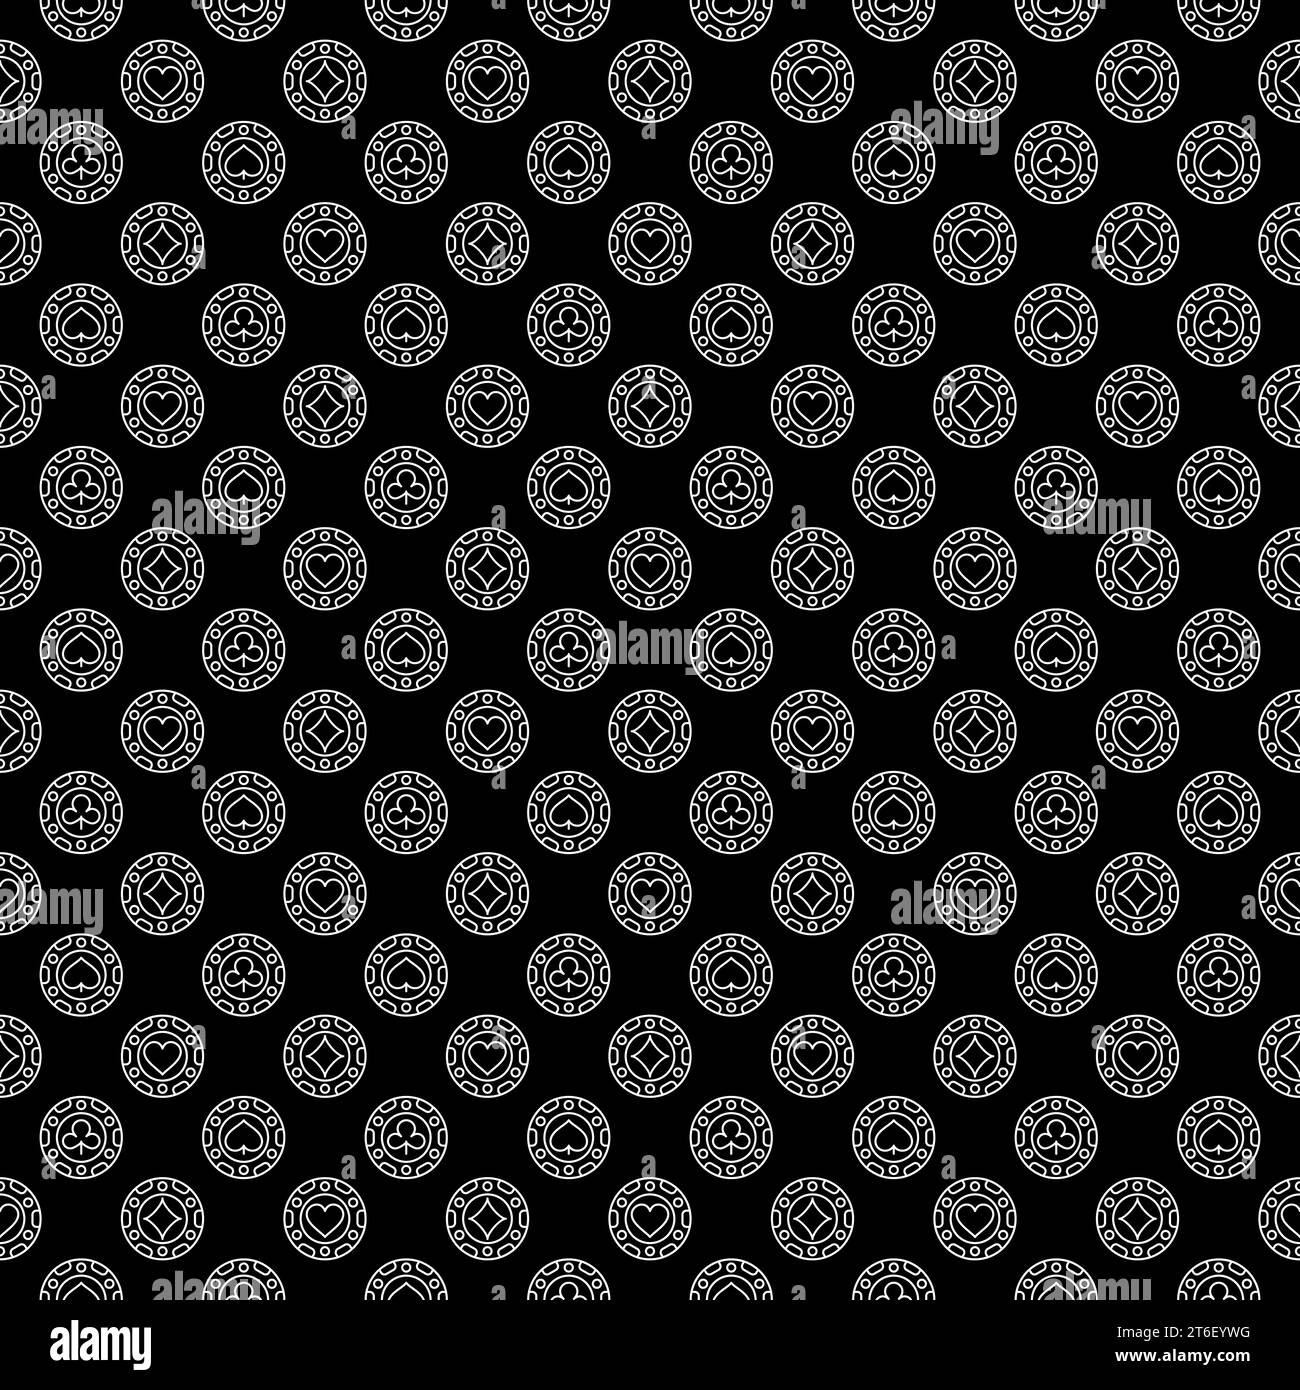 Poker Chips Seamless minimal Pattern - vector concept casino or poker dark background in thin line style Stock Vector